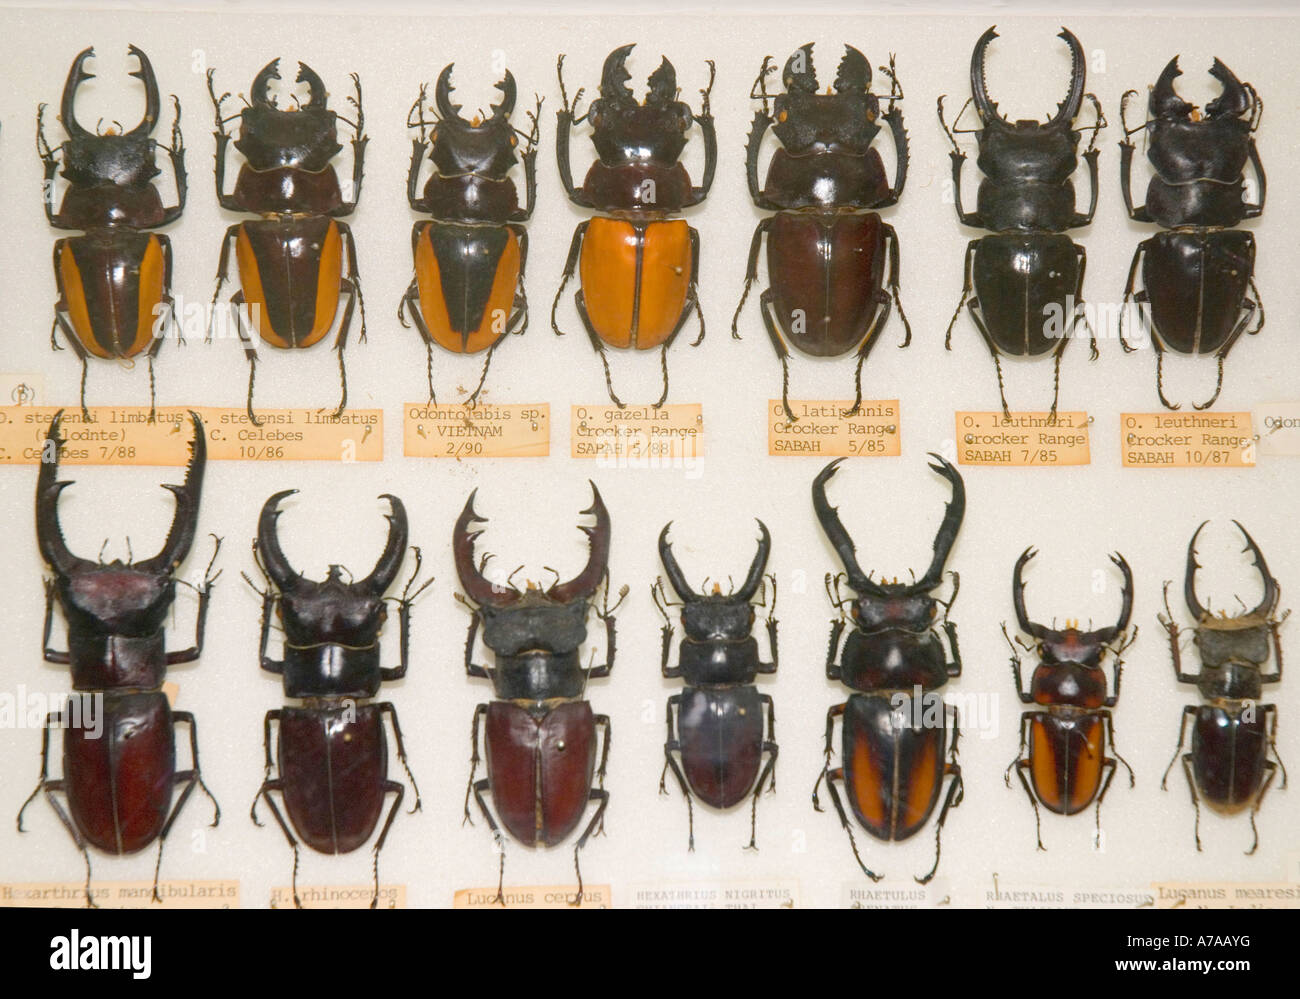 A museum collection of Asian stag beetles Stock Photo